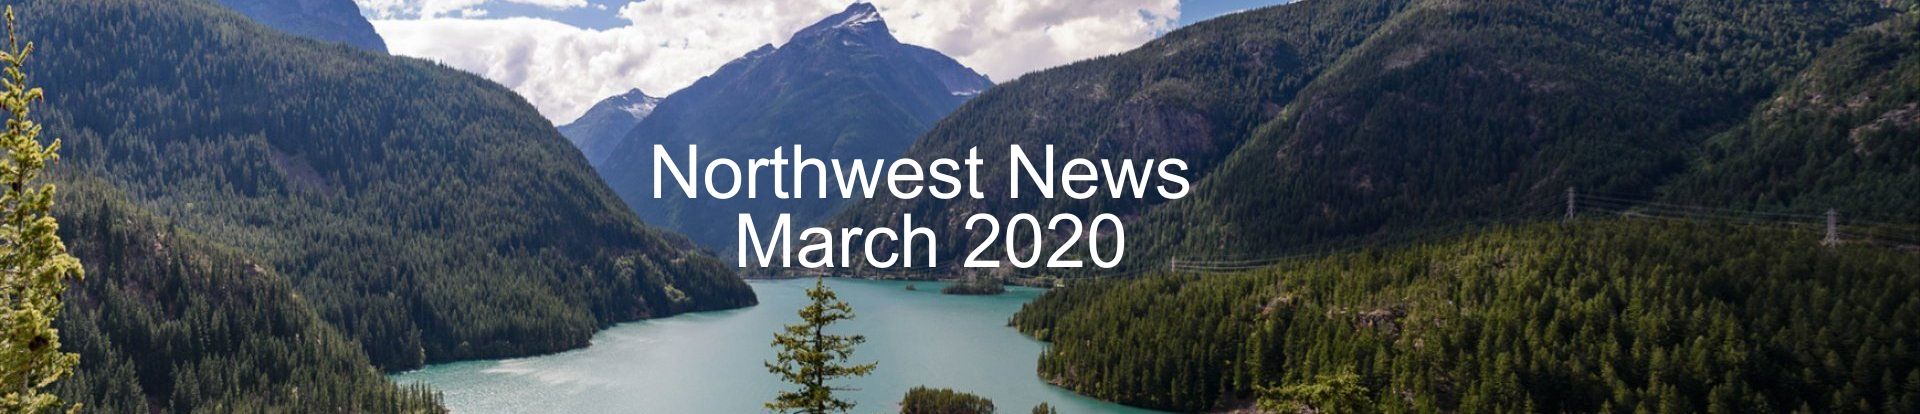 Image of Pacific Northwest scenery with the words Northwest News March 2020 superimposed